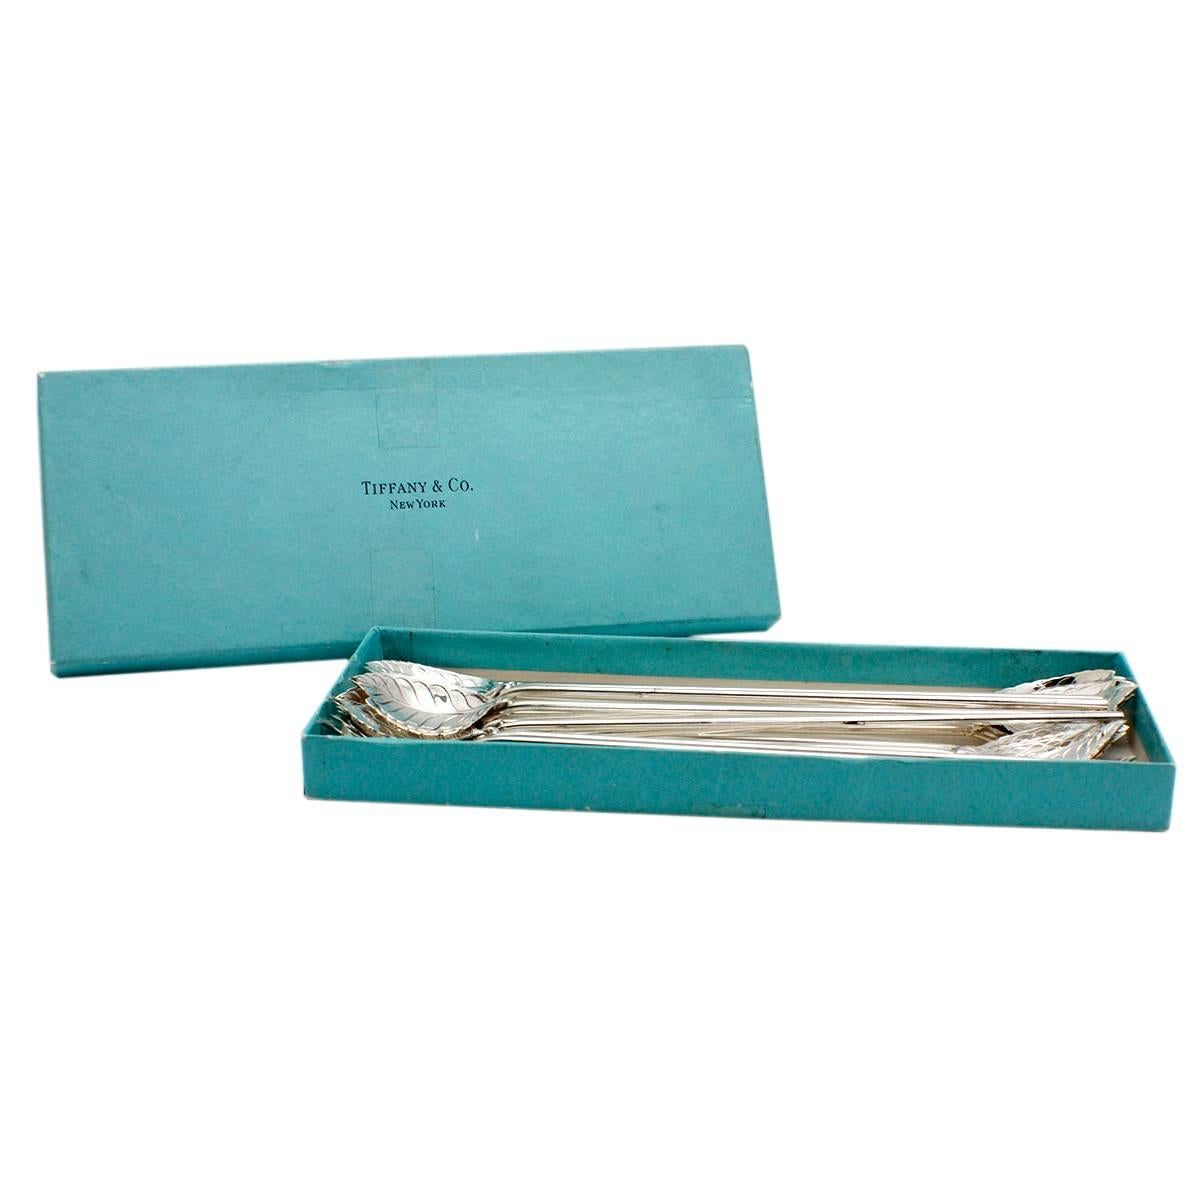 This stunning set of 17 signed Tiffany and Company mint julep spoons are sure to accentuate any afternoon tea or evening mojito. Each piece is composed of sterling silver and has the artistically designed mint leaf on the end. The handles are hollow